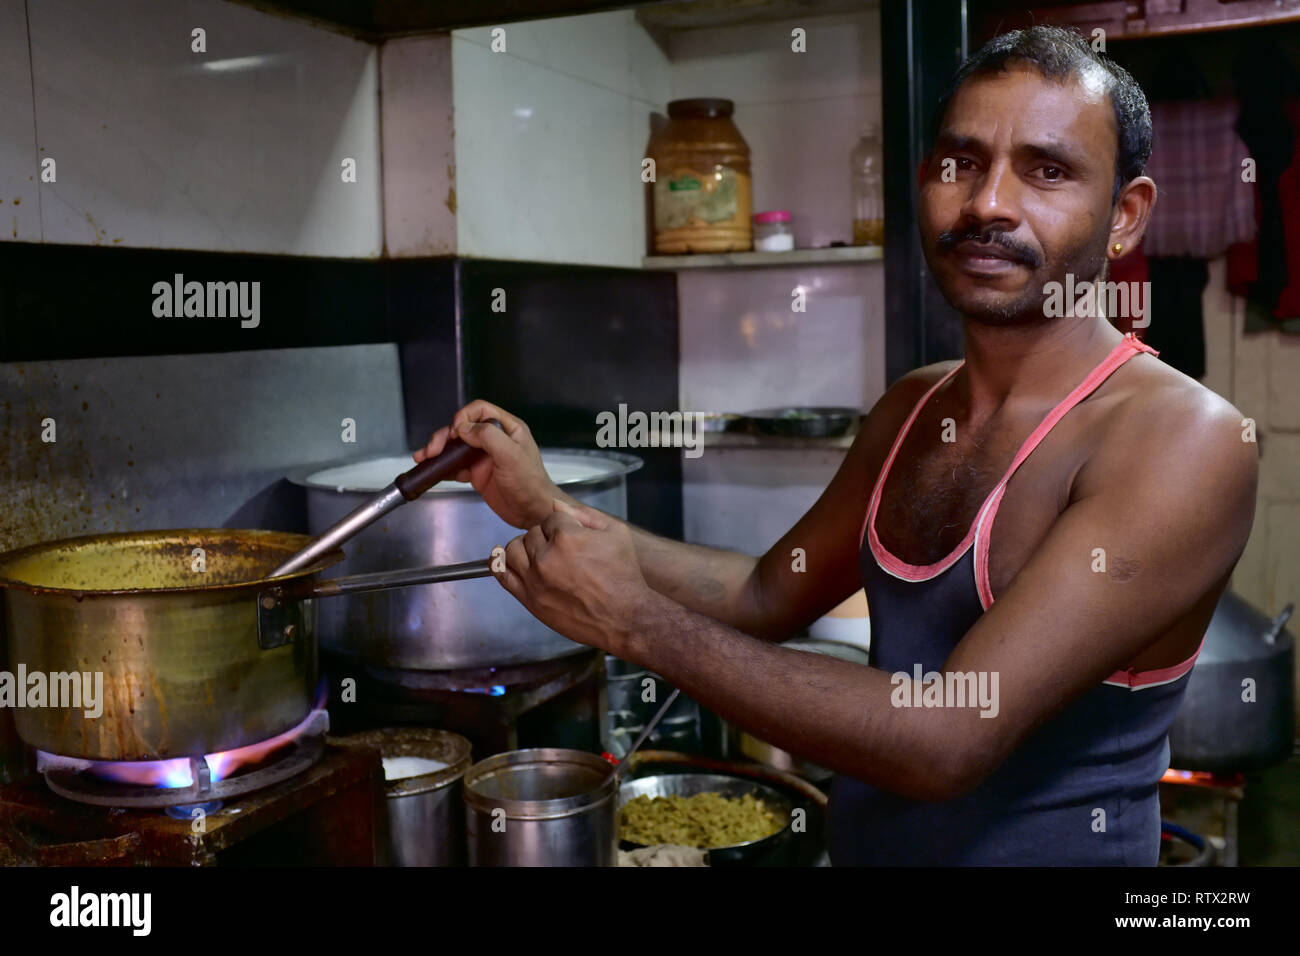 An employee in a small tea house in Mumbai, India, in Indian fashion boiling water, milk, tea and spices for Masala Tea (spiced tea) Stock Photo